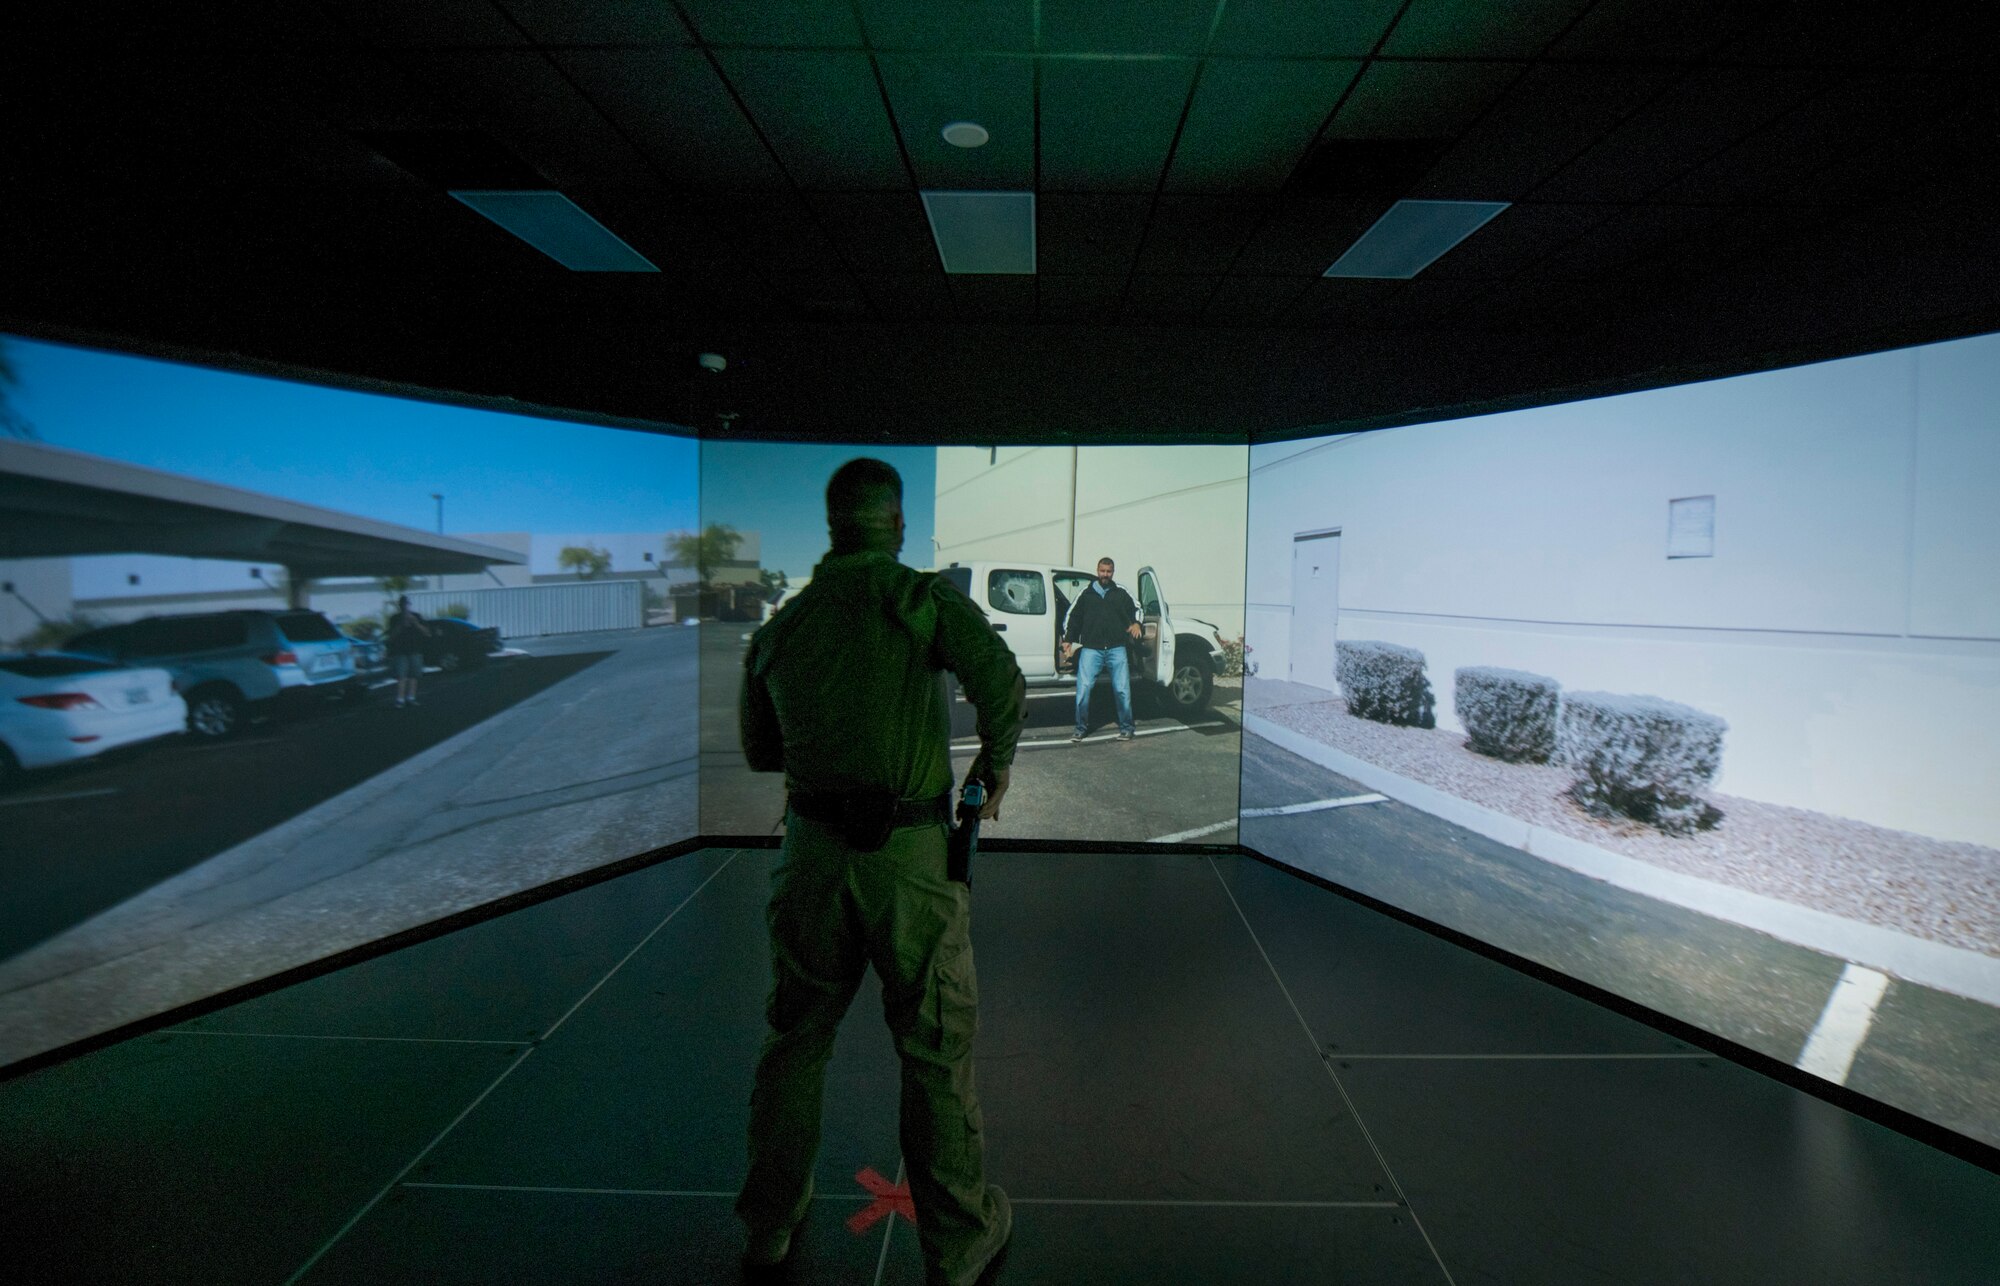 A member of the 502d Security Forces Squadron responds to a virtual hostile exercise at the Alamo Area Council of Governments, San Antonio, Texas, Oct 22, 2020.